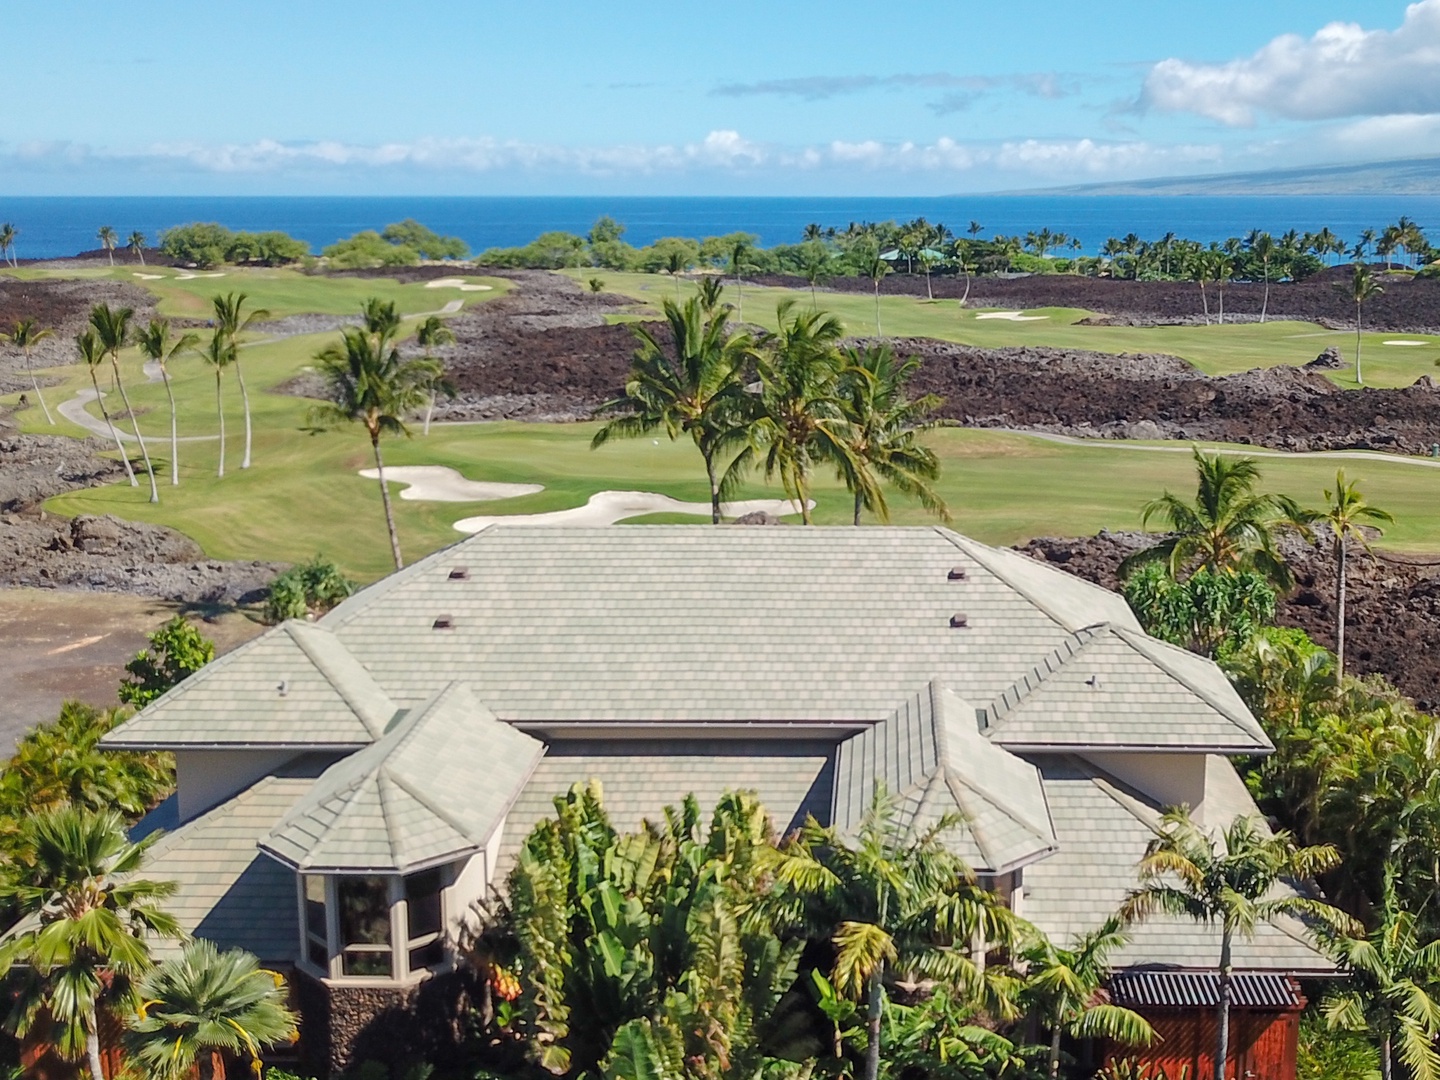 Kamuela Vacation Rentals, 3BD Ke Kailani (1C) at Mauna Lani Resort - House Surrounded by the Manicured Greens of the Mauna Lani Course, just Minutes from the Ocean and Beach Club